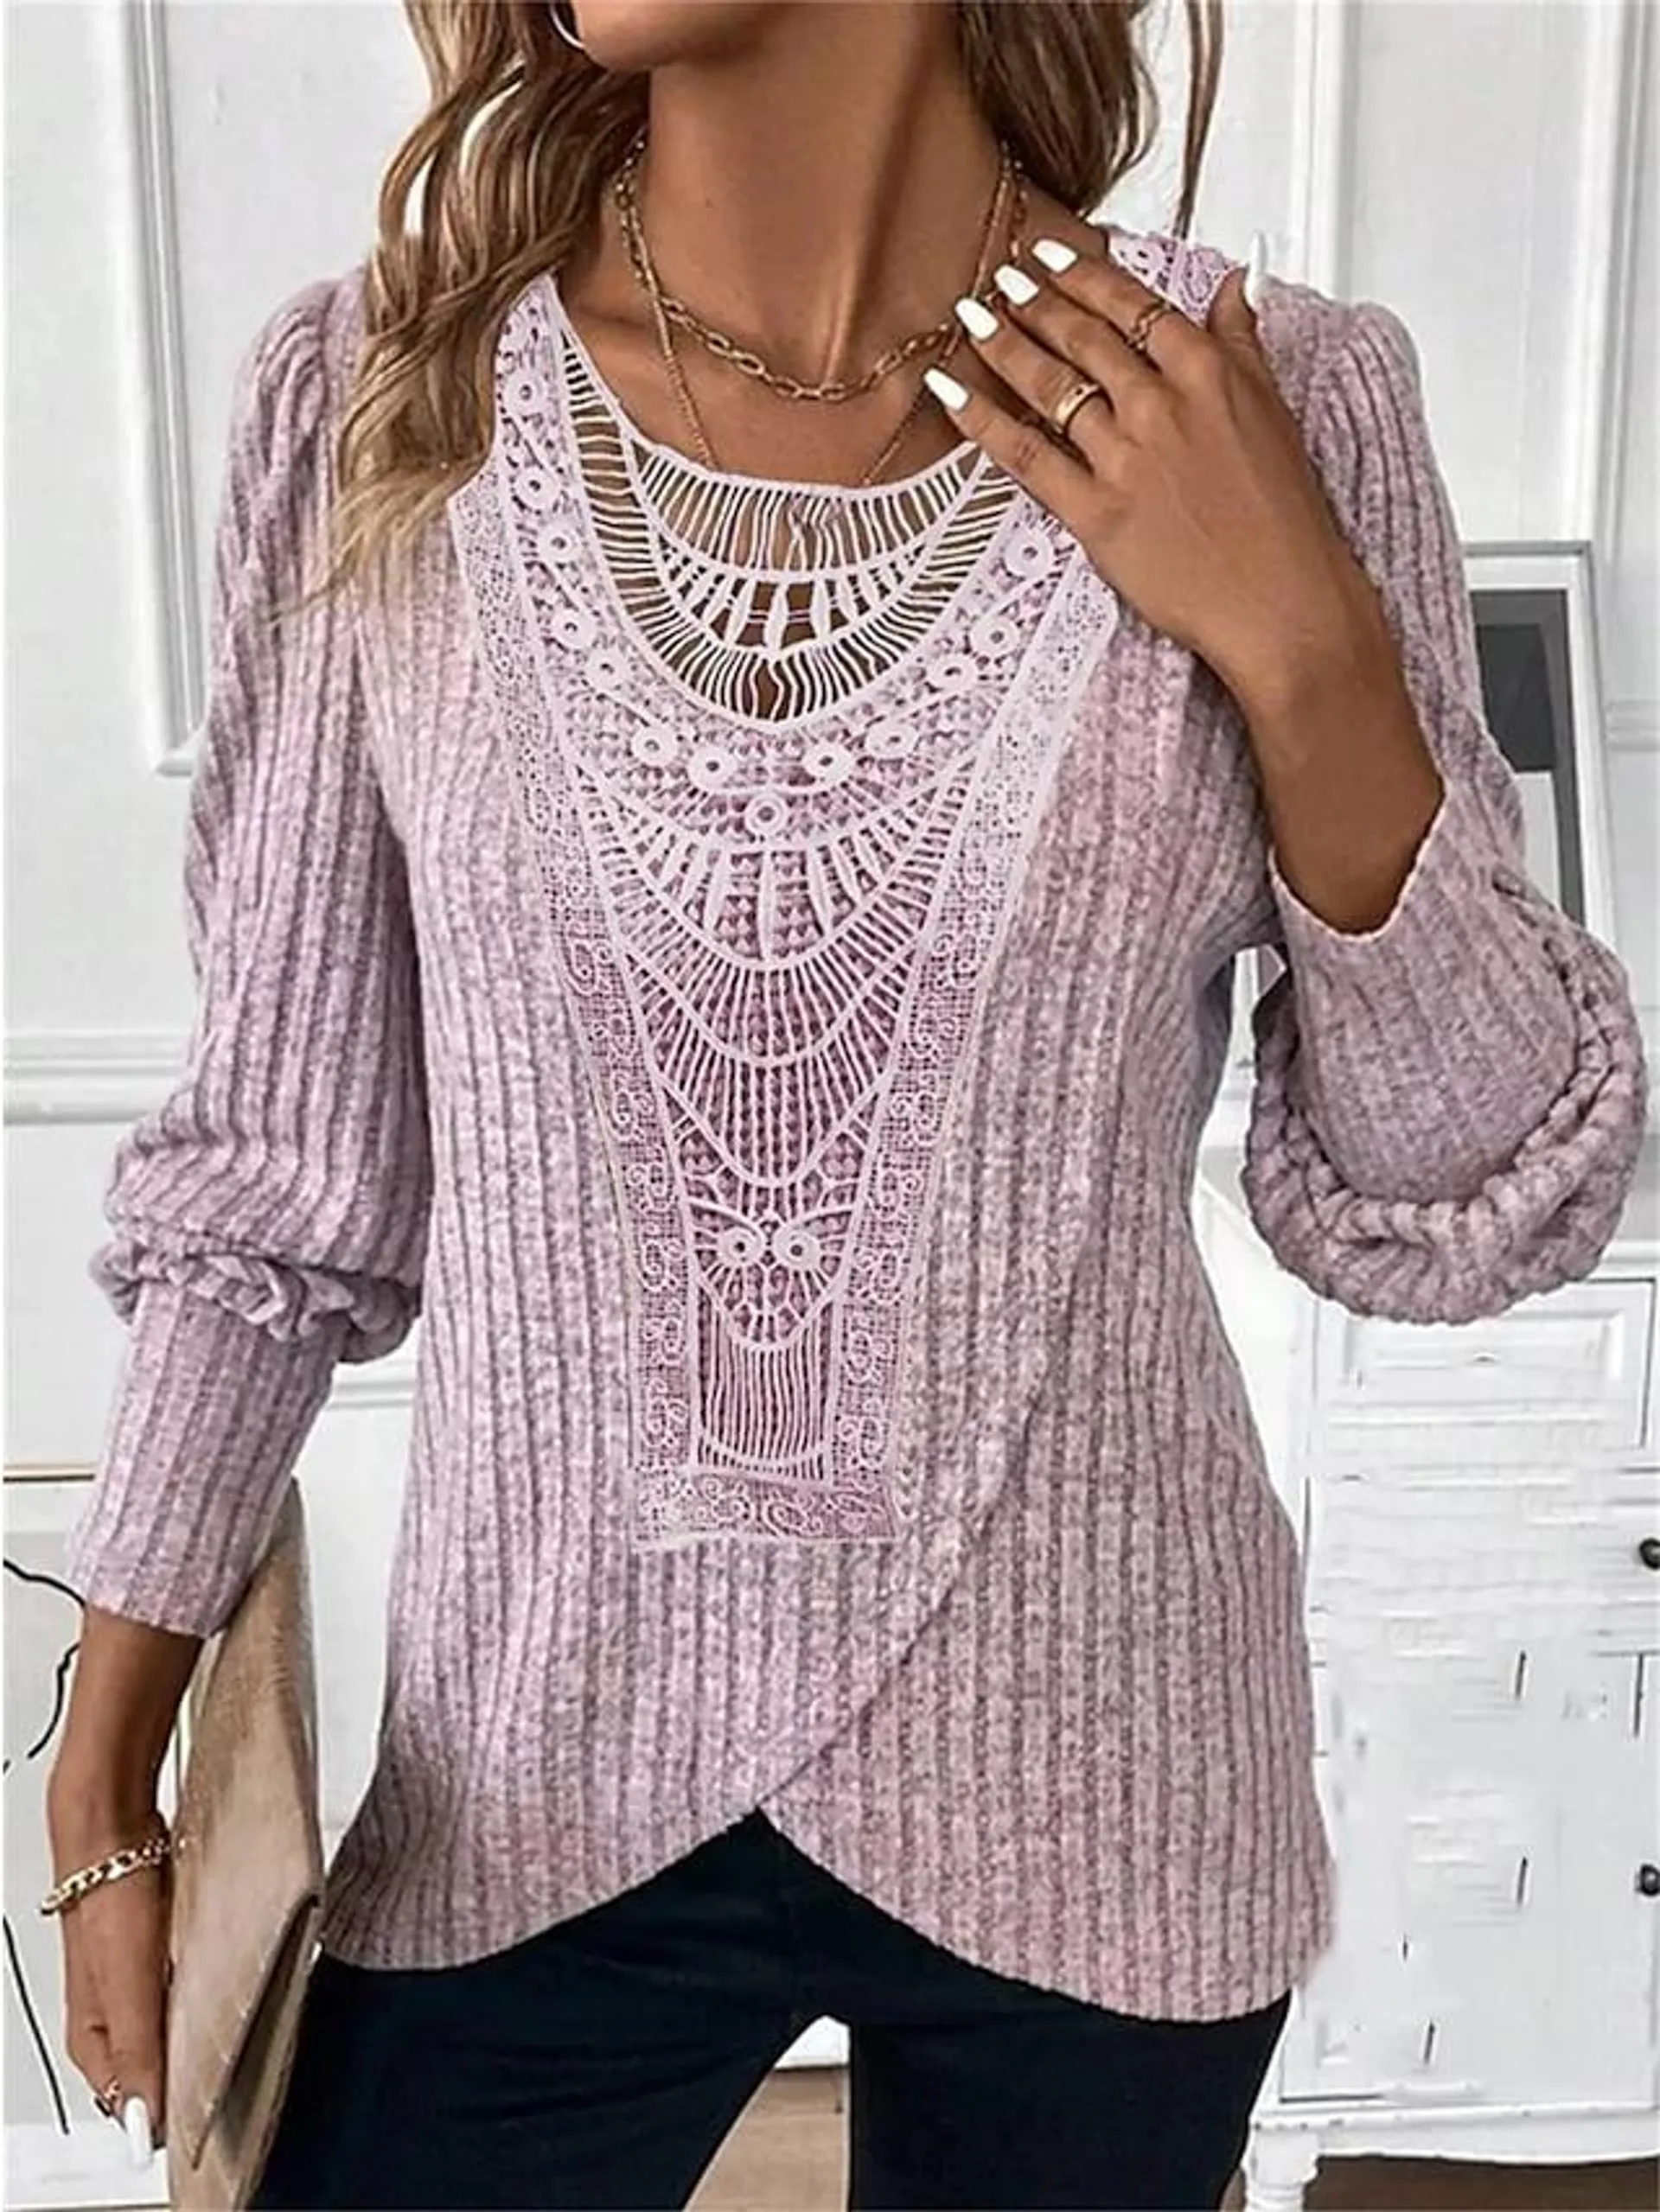 Women's Lace Shirt Shirt Blouse Plain Casual Pink Blue Gray Lace Long Sleeve Fashion Round Neck Regular Fit Spring